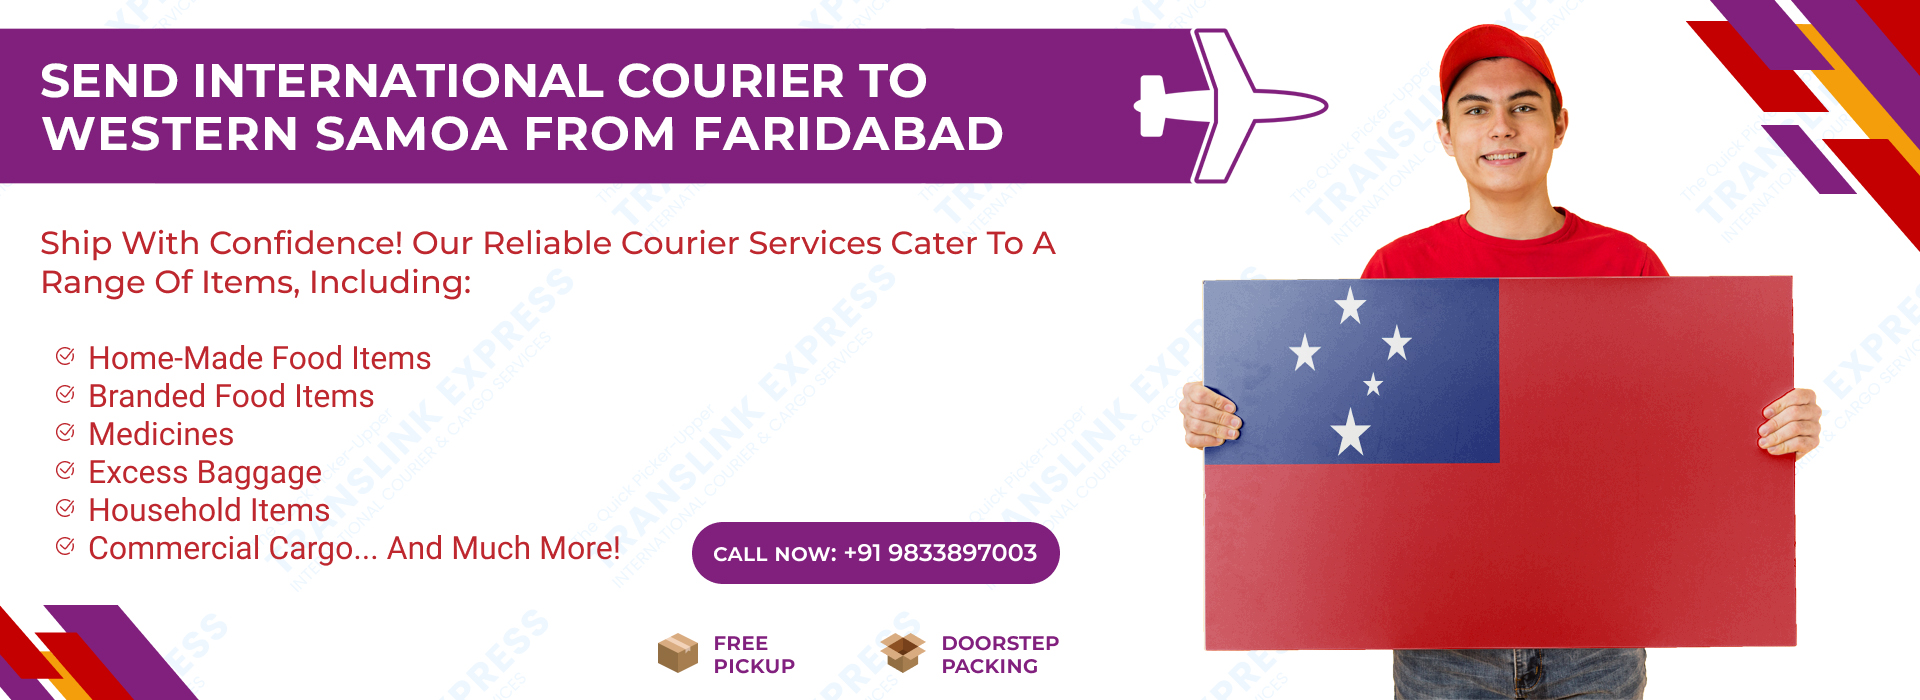 Courier to Western Samoa From Faridabad